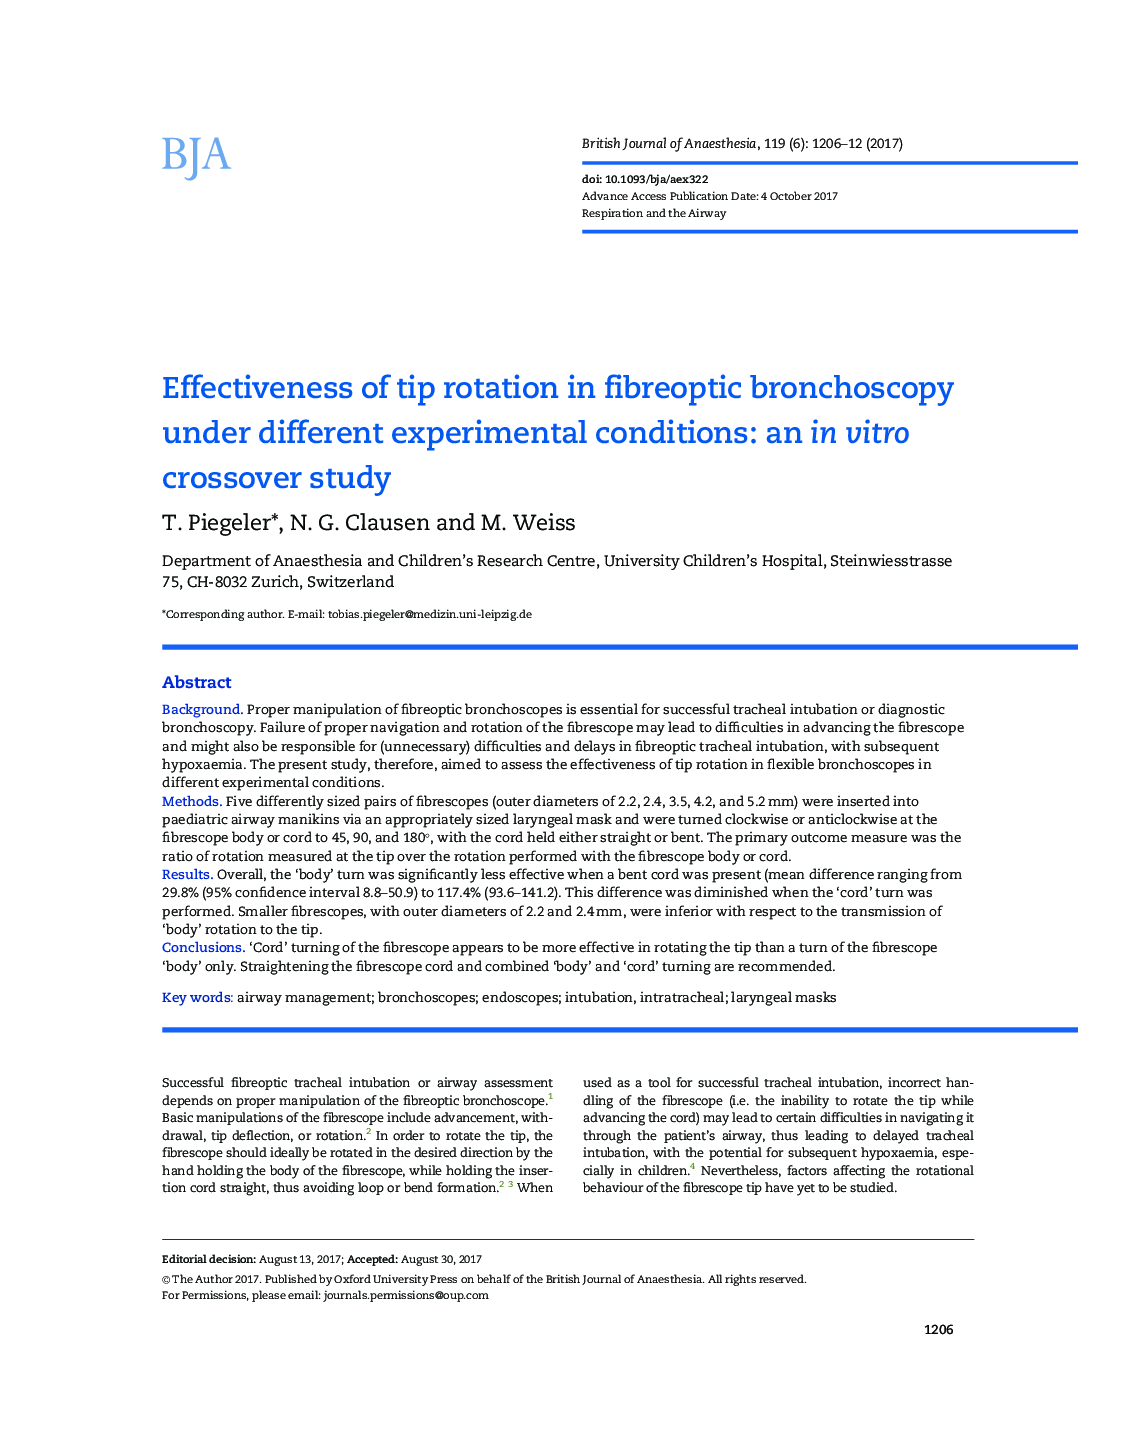 Effectiveness of tip rotation in fibreoptic bronchoscopy under different experimental conditions: an in vitro crossover study